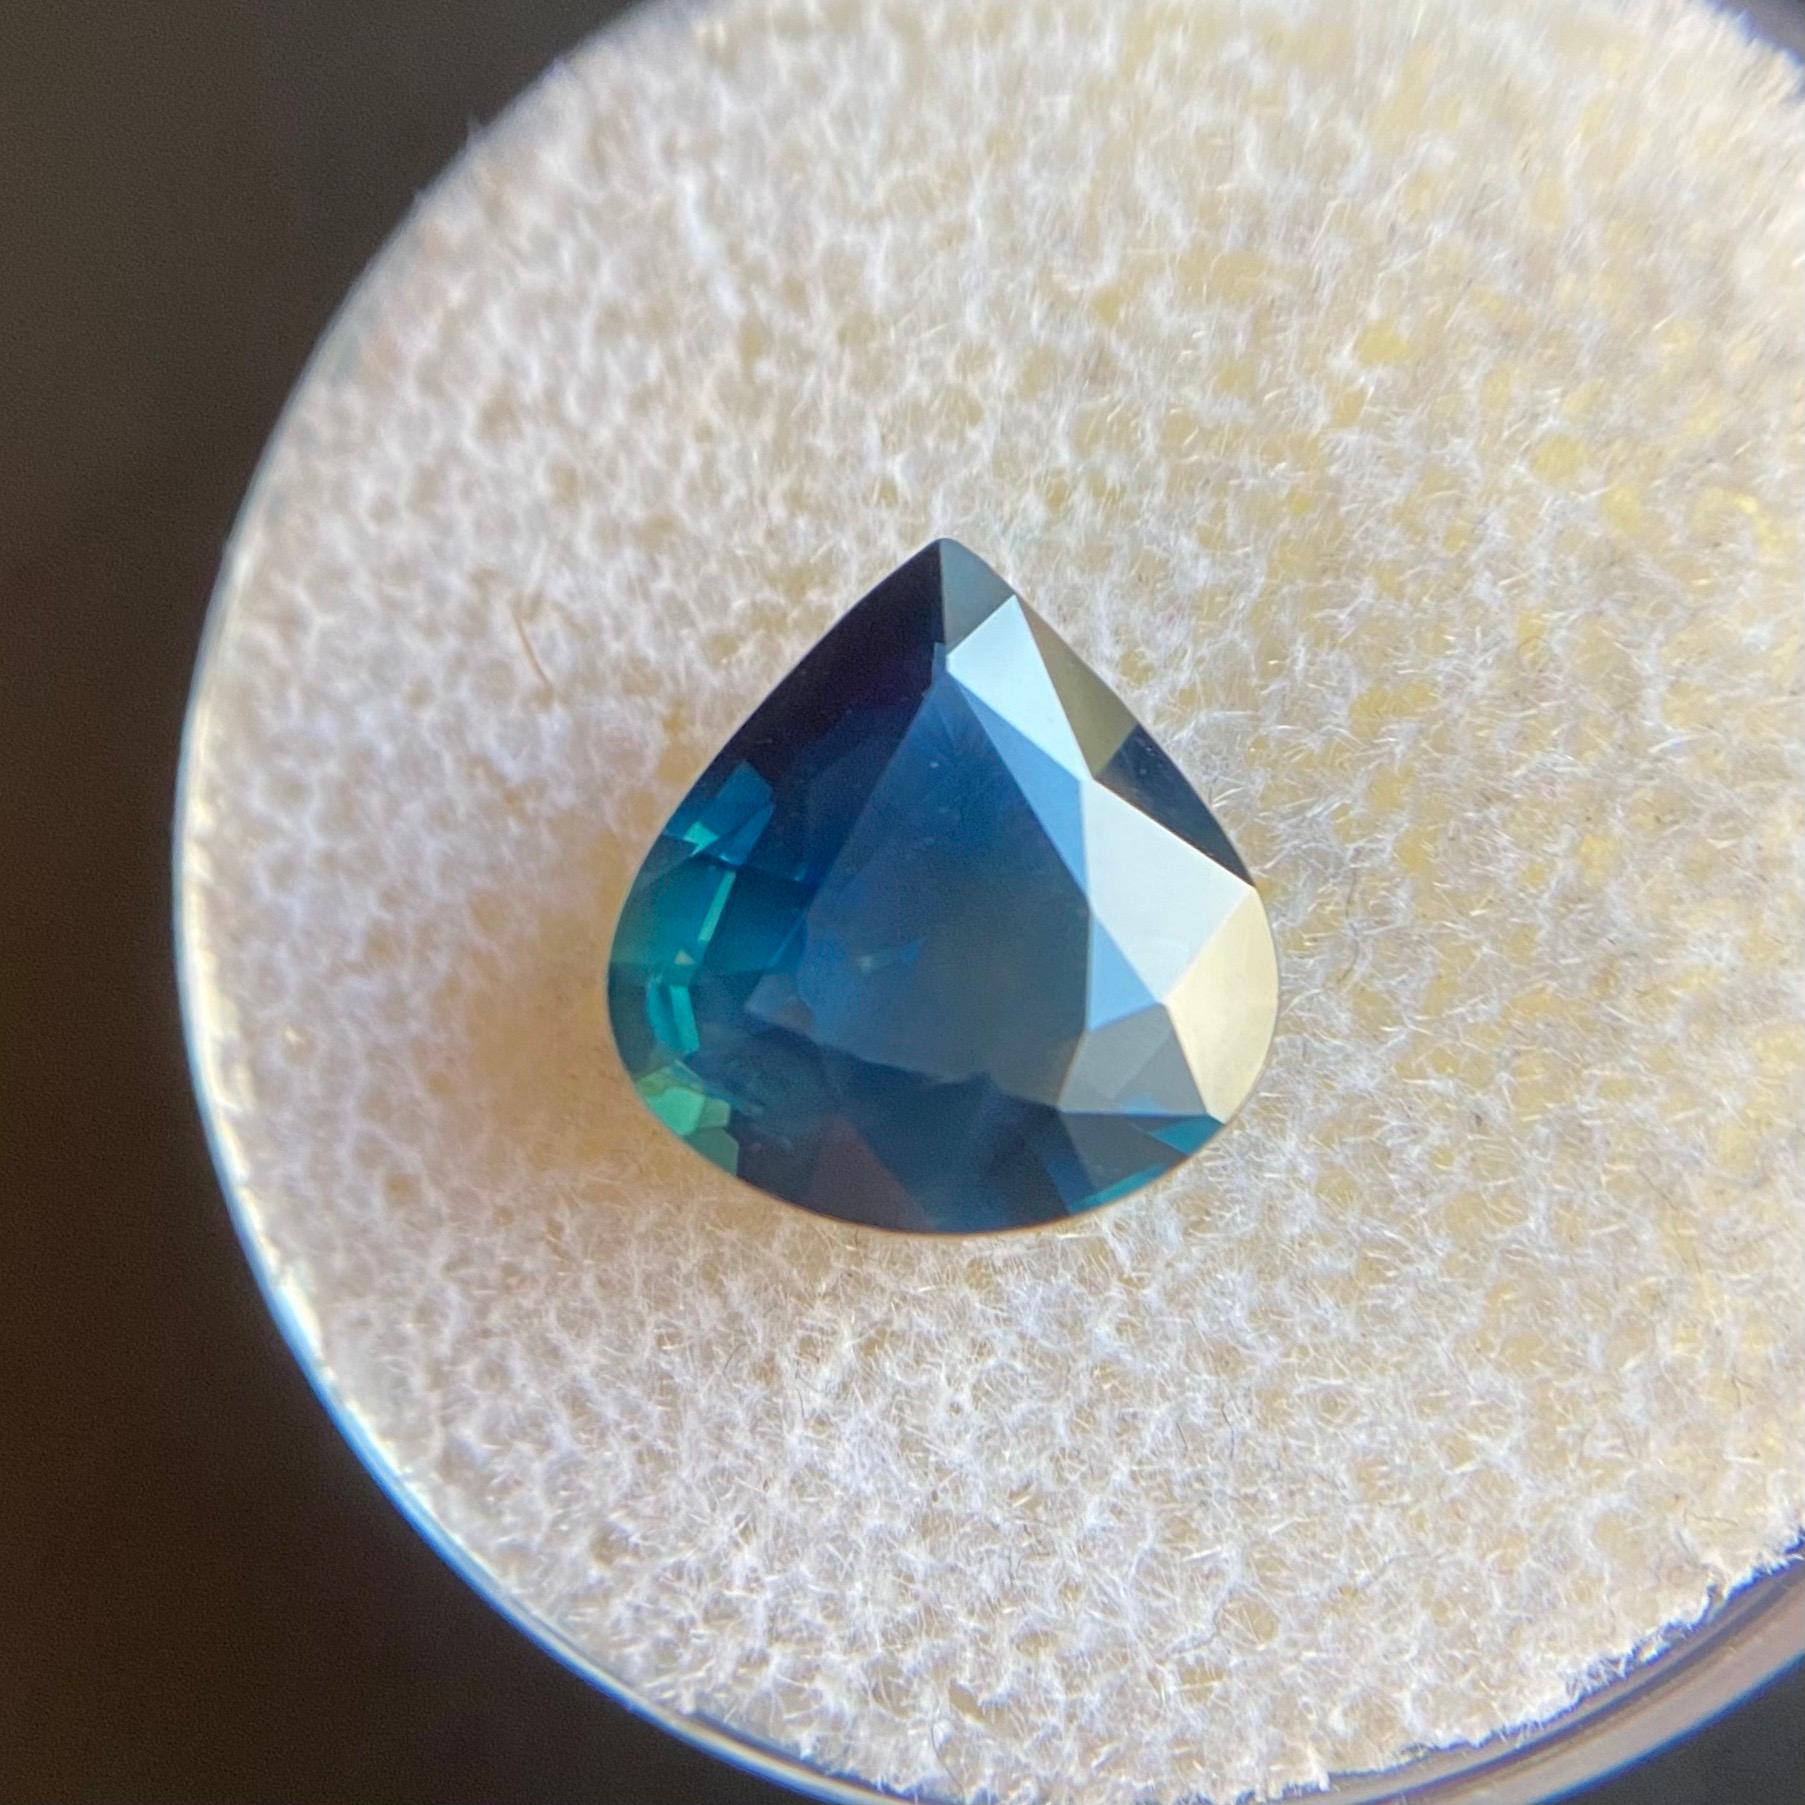 Fine Untreated Greenish Blue Sapphire Gemstone.

Fine quality unheated sapphire with a beautiful and unique greenish blue colour. Fully certified by GIA confirming stone as natural and untreated. Very rare for natural sapphires.

2.51 Carat with